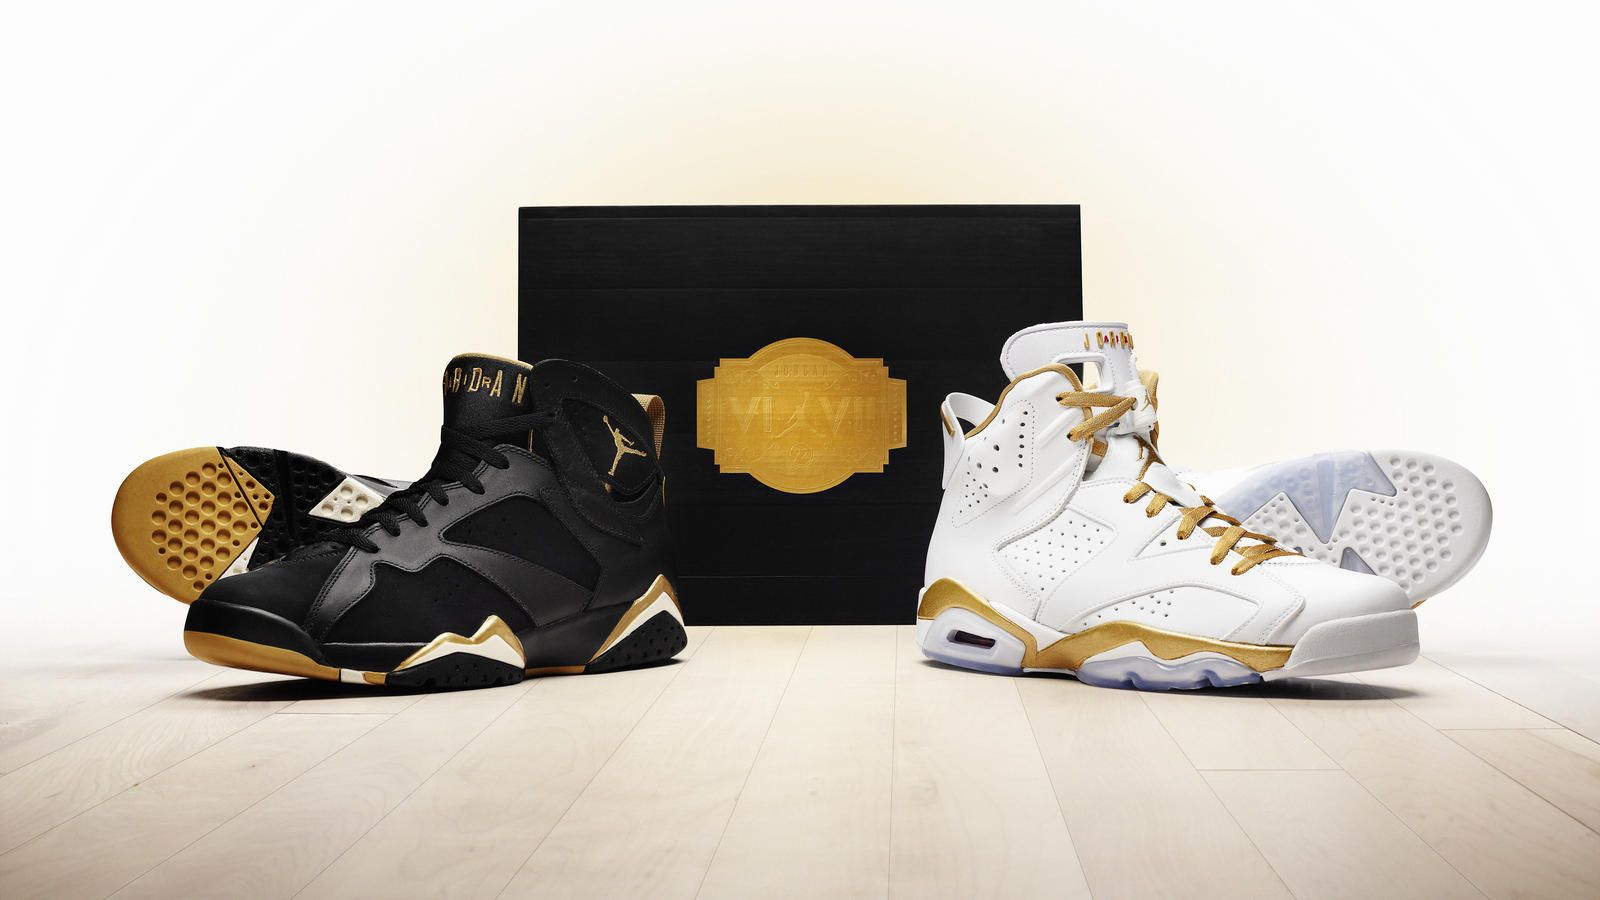 Jordan Brand unveils the 'Golden Moments' pack releasing on Aug